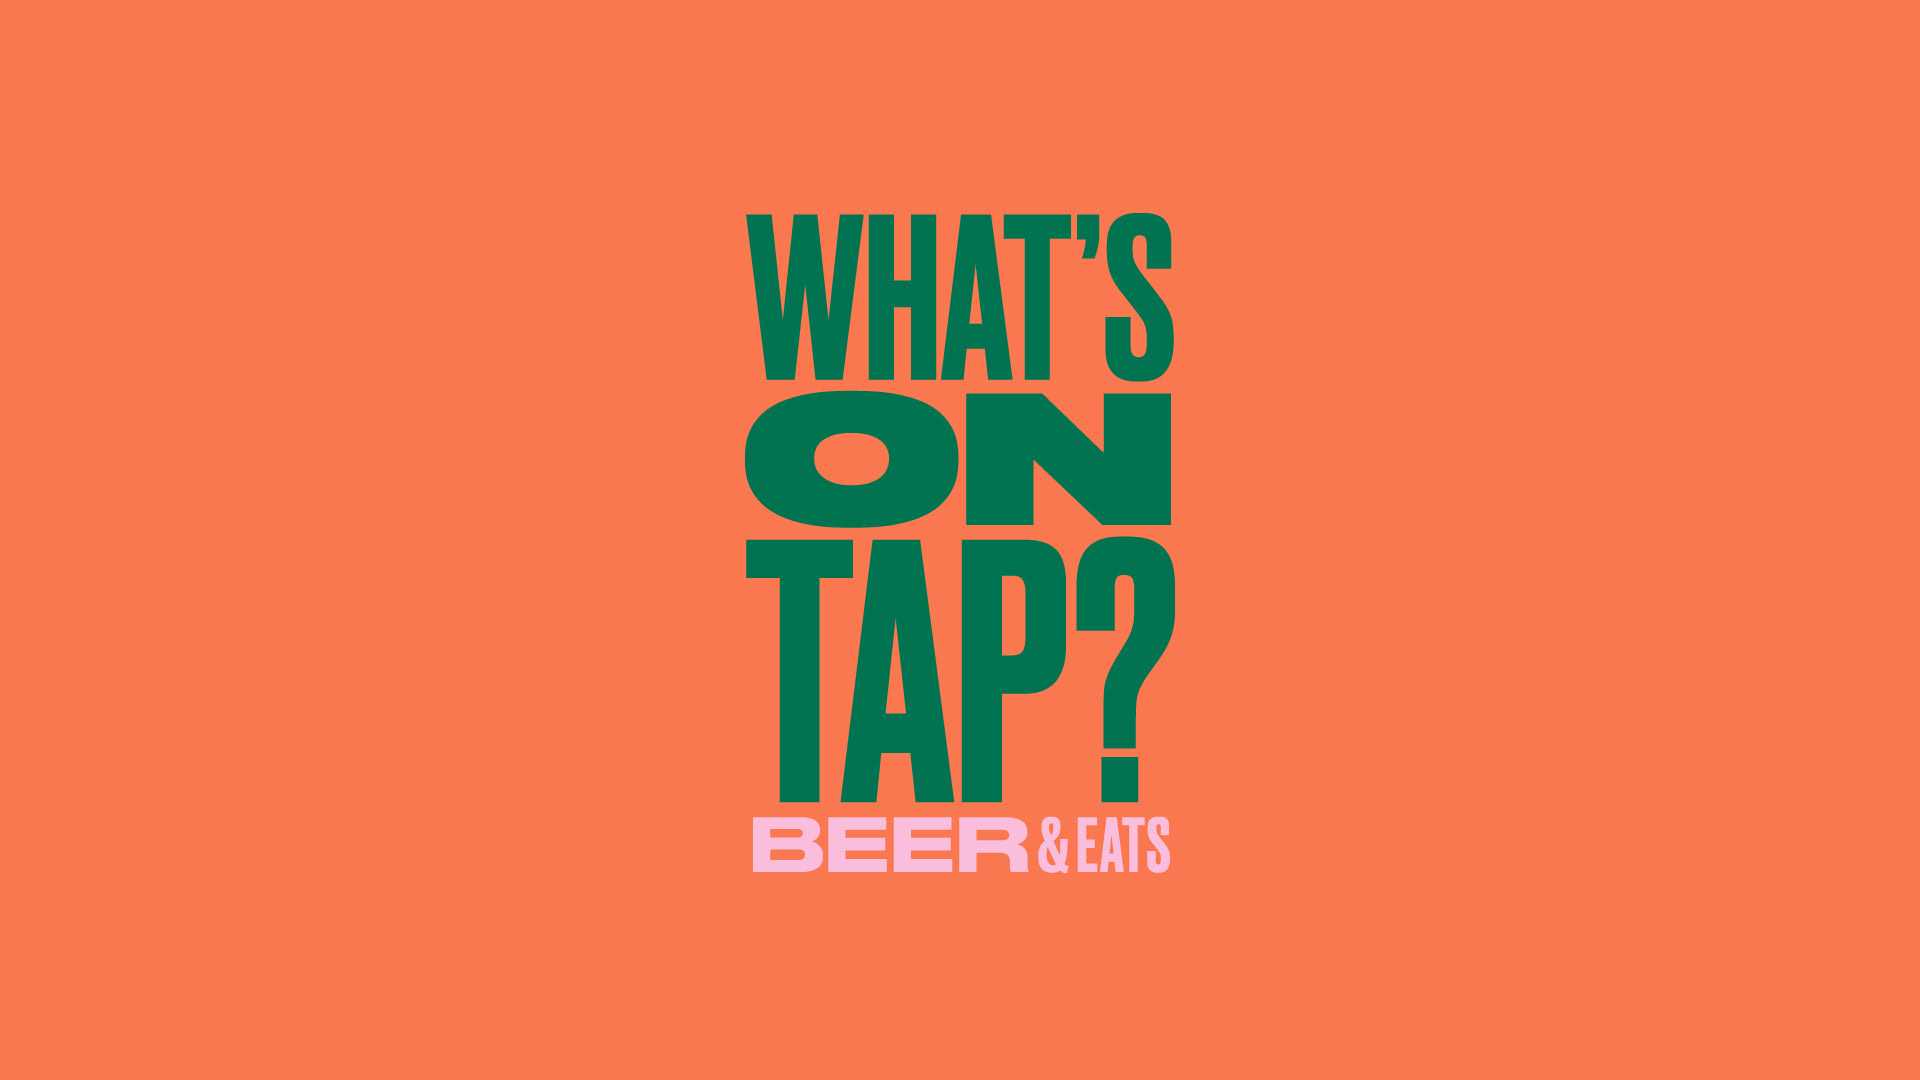 What's On Tap?